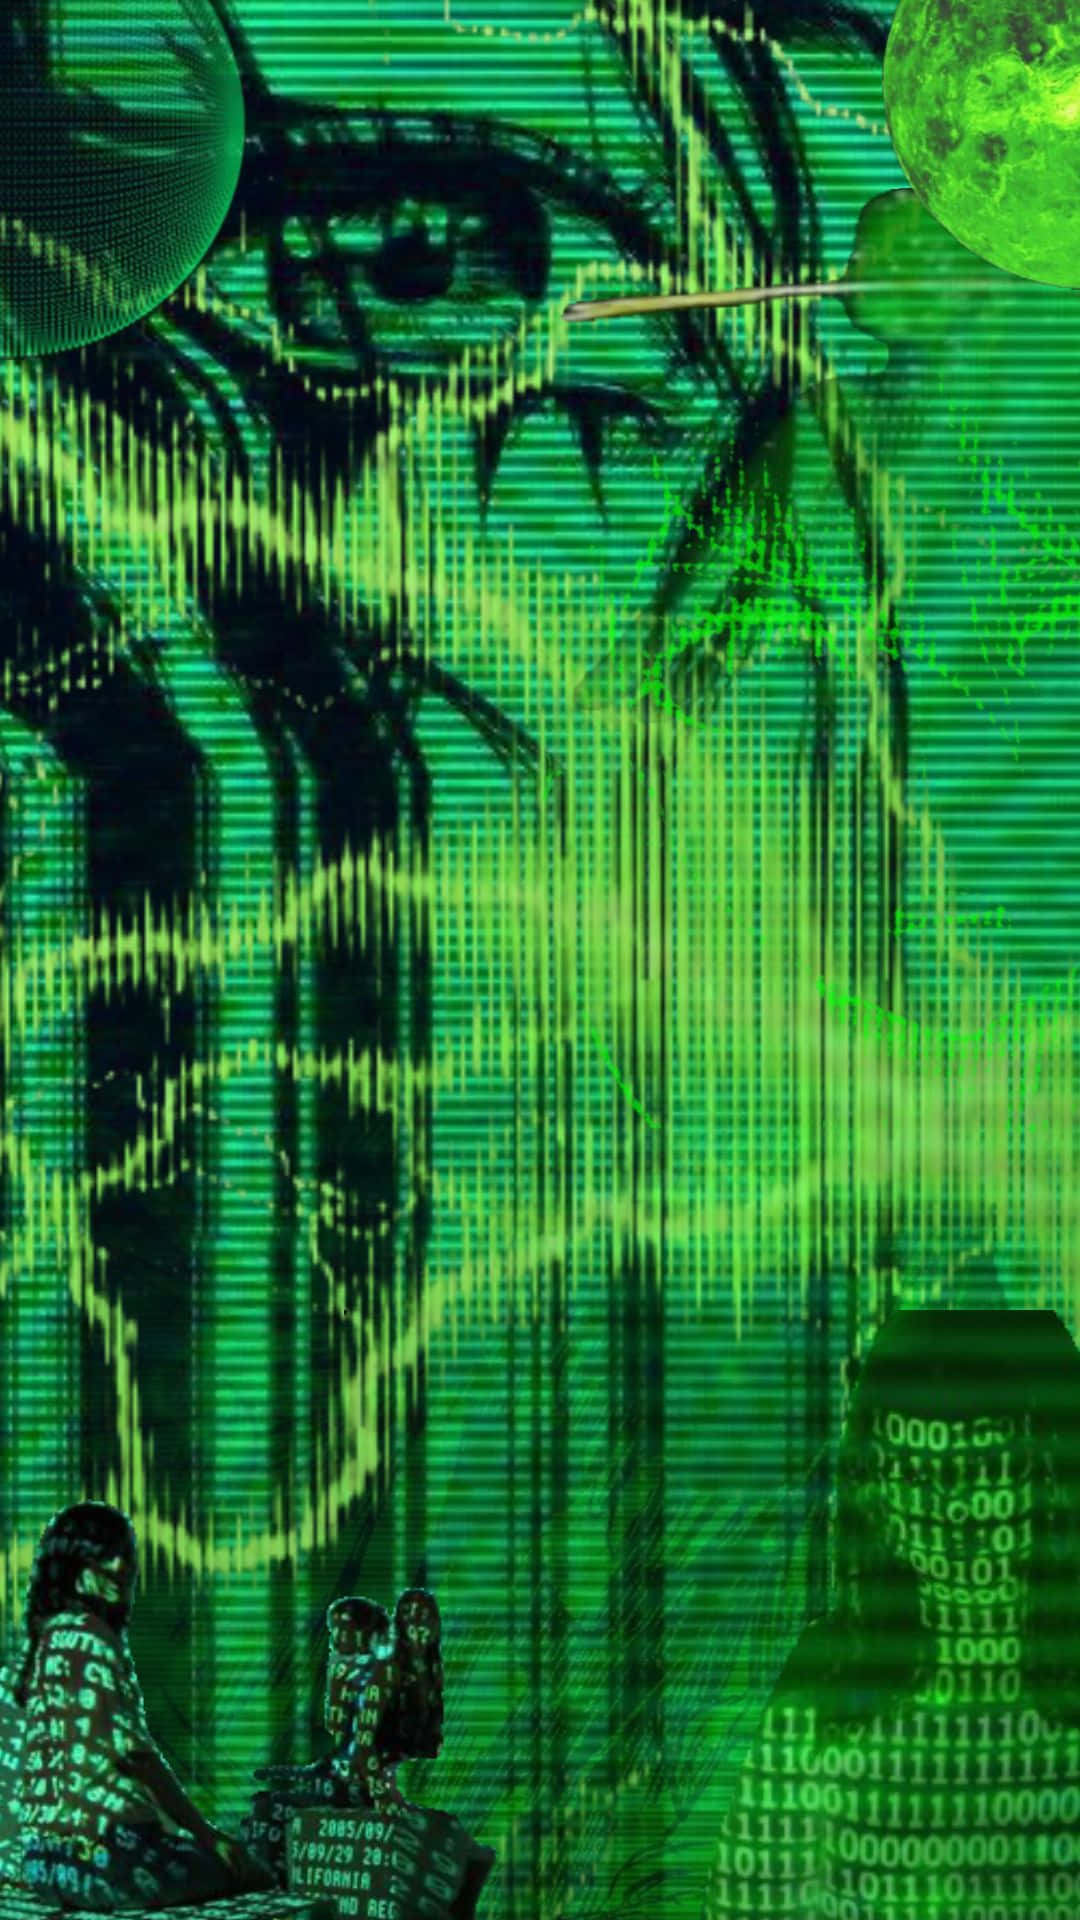 Green Cyber Y2 K Aesthetic Abstract Wallpaper